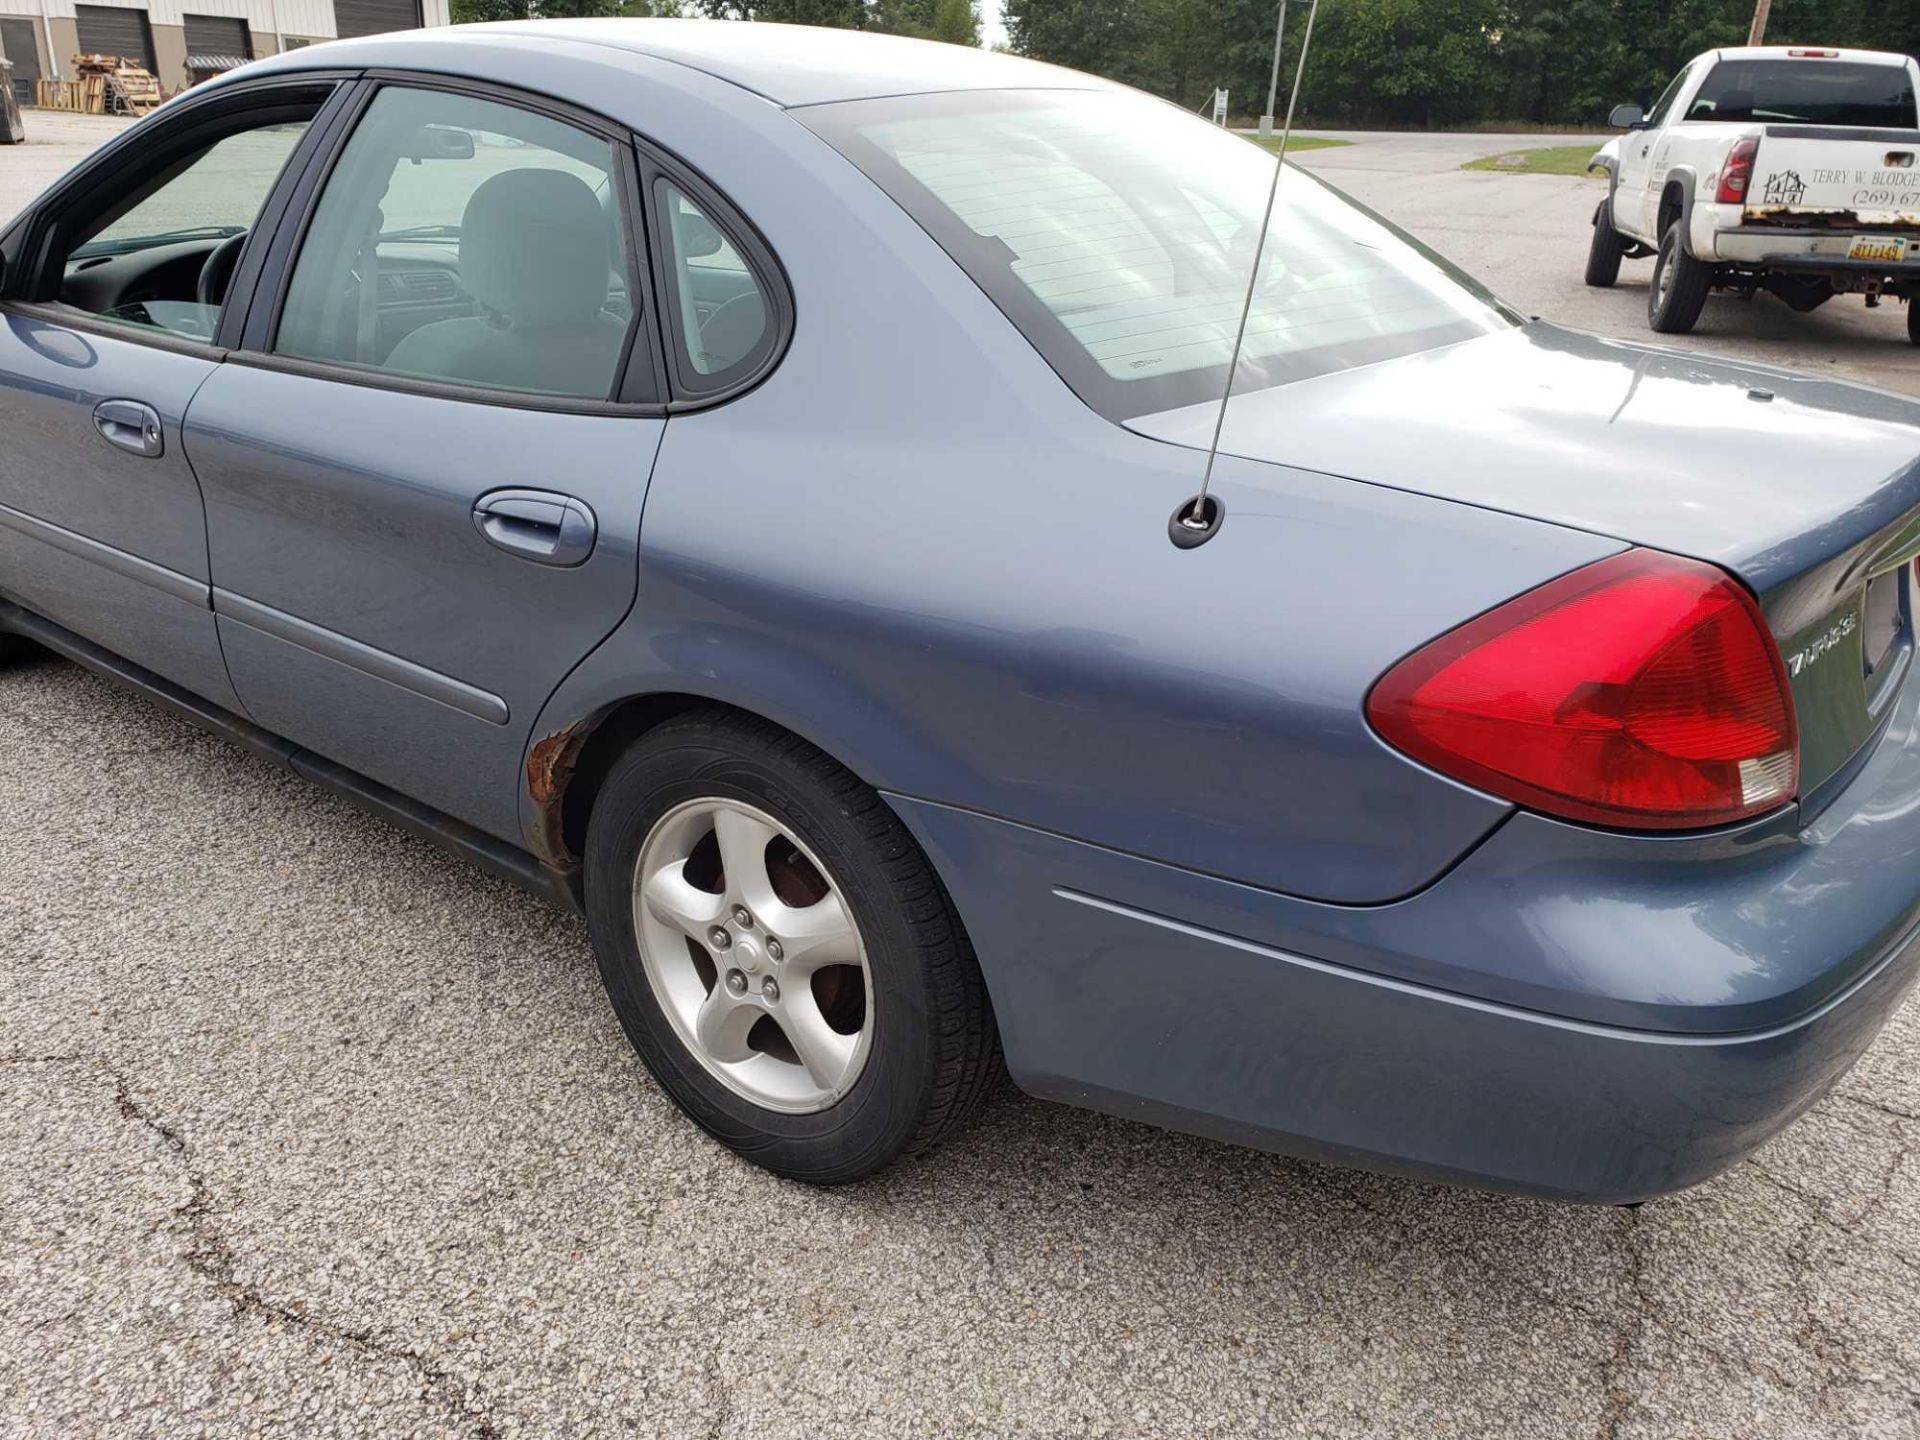 2001 Ford Taurus VIN 1FAFP53291G230229, 70,126 miles. Municipally owned and maintained. - Image 3 of 18